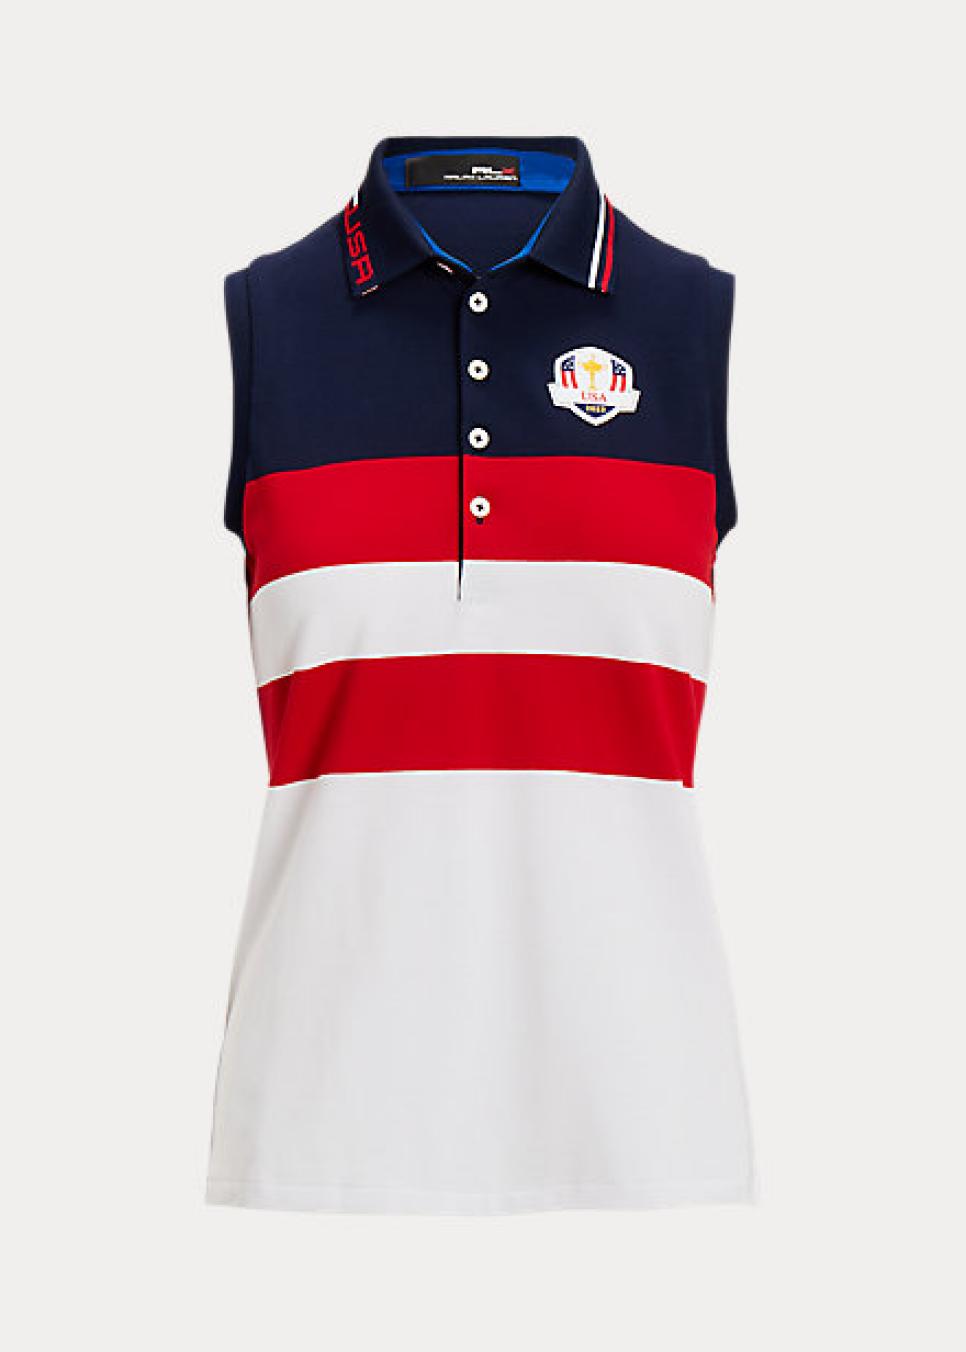 rx-rlxrlx-womens-us-ryder-cup-classic-fit-polo.jpeg